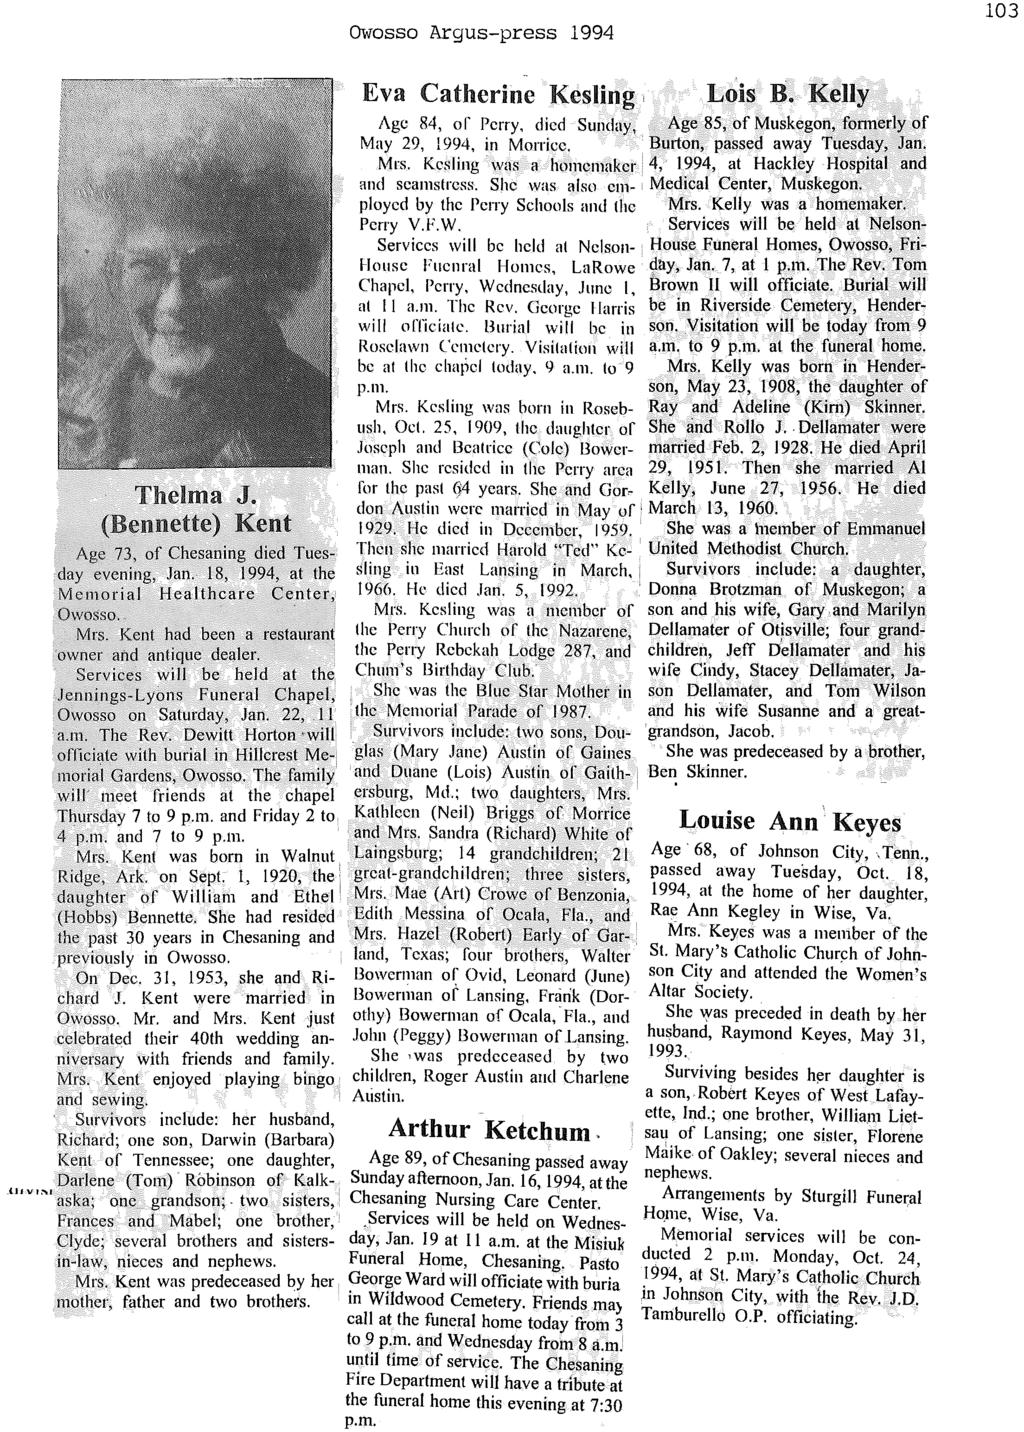 OWosso Argus-press 1994 103 Darlene (Tom) Robinson of Kalk- k as. a; one grandson;. two sisters, Frances and Mabel; one brother, Clyde; several brothers and sistersin-law, nieces and nephews. Mrs.